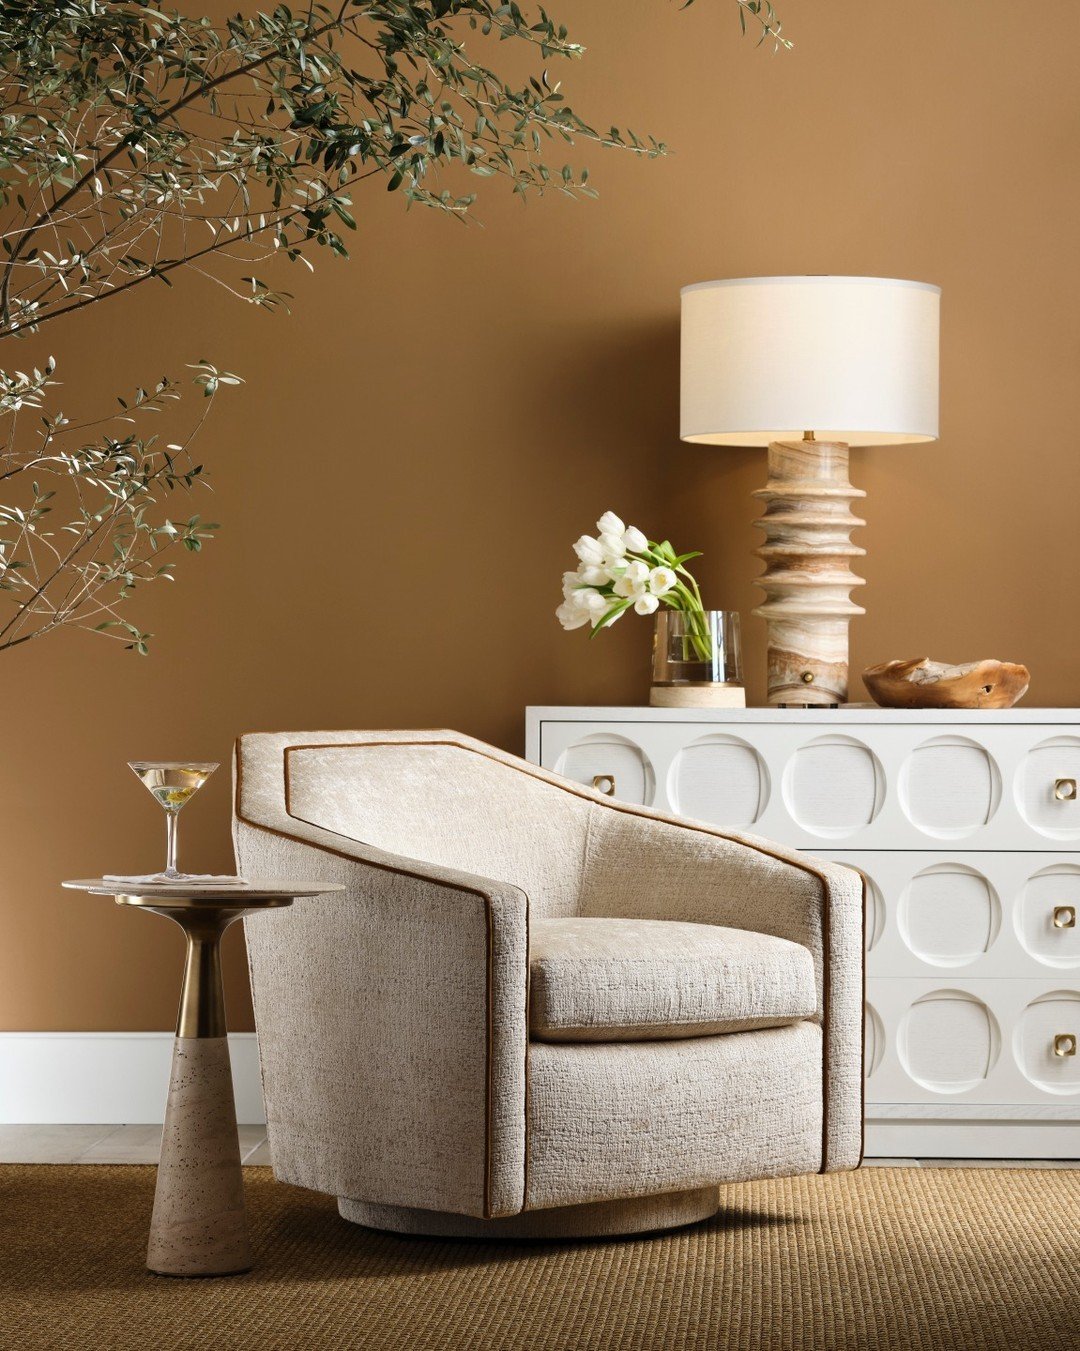 Create the ultimate space for comfortable conversations with the Repartee Swivel Chair. It features a welt trim that accentuates the jewel-like shape of the back and arms. Expertly crafted in the USA. Contact us to learn more (800) 645-6813!